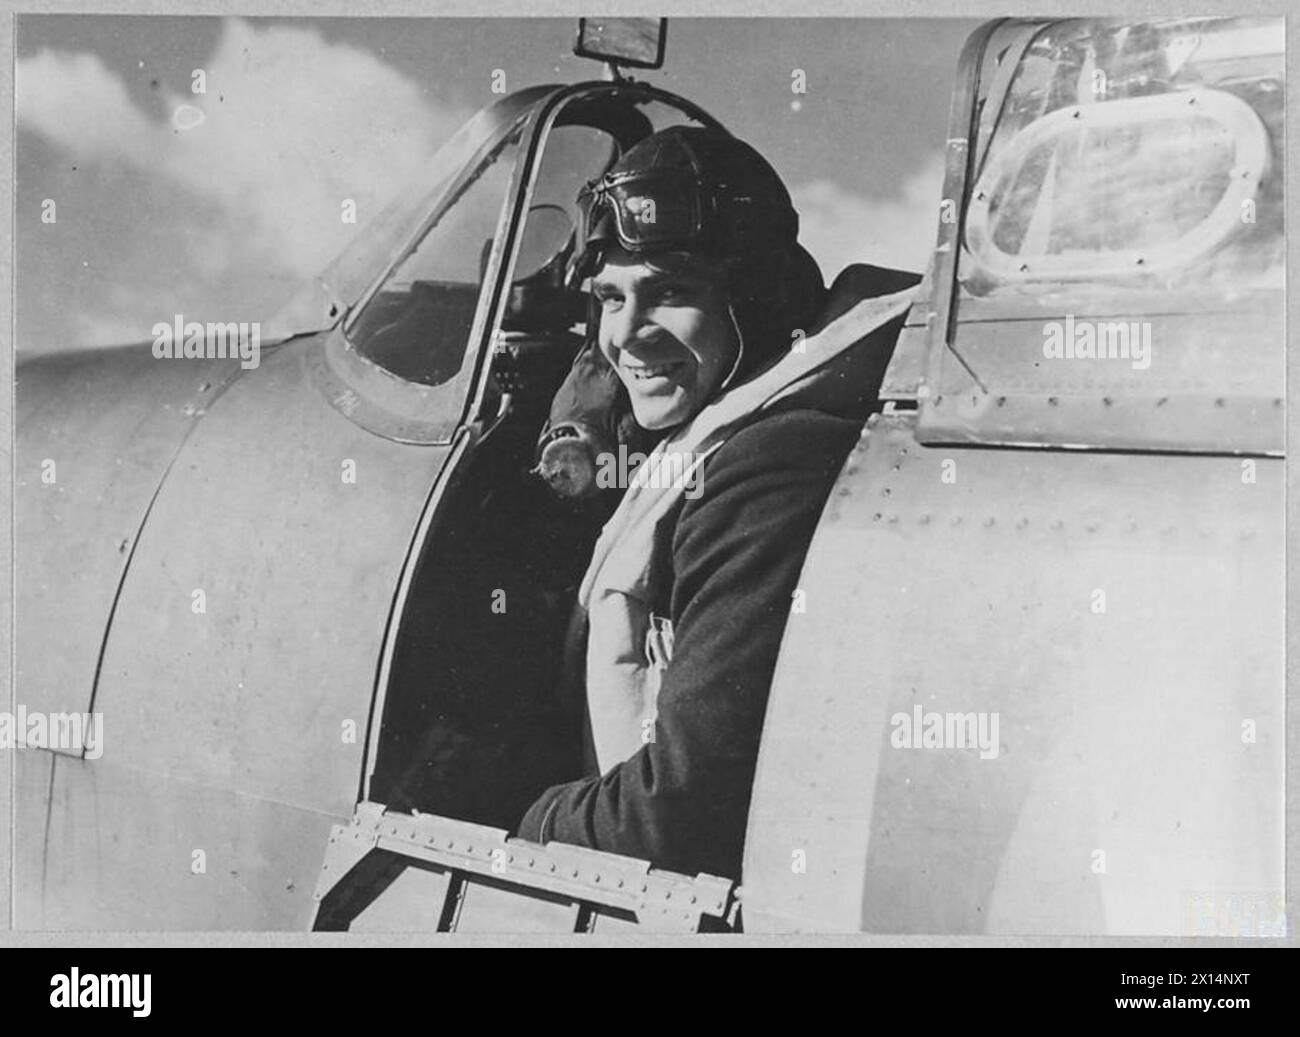 THE BATTLE OF BRITAIN 1940 - Flight Lieutenant Richard Jones smiles at the camera while seated in the cockpit of his Spitfire at Fowlmere, 21 September 1940 Royal Air Force Stock Photo